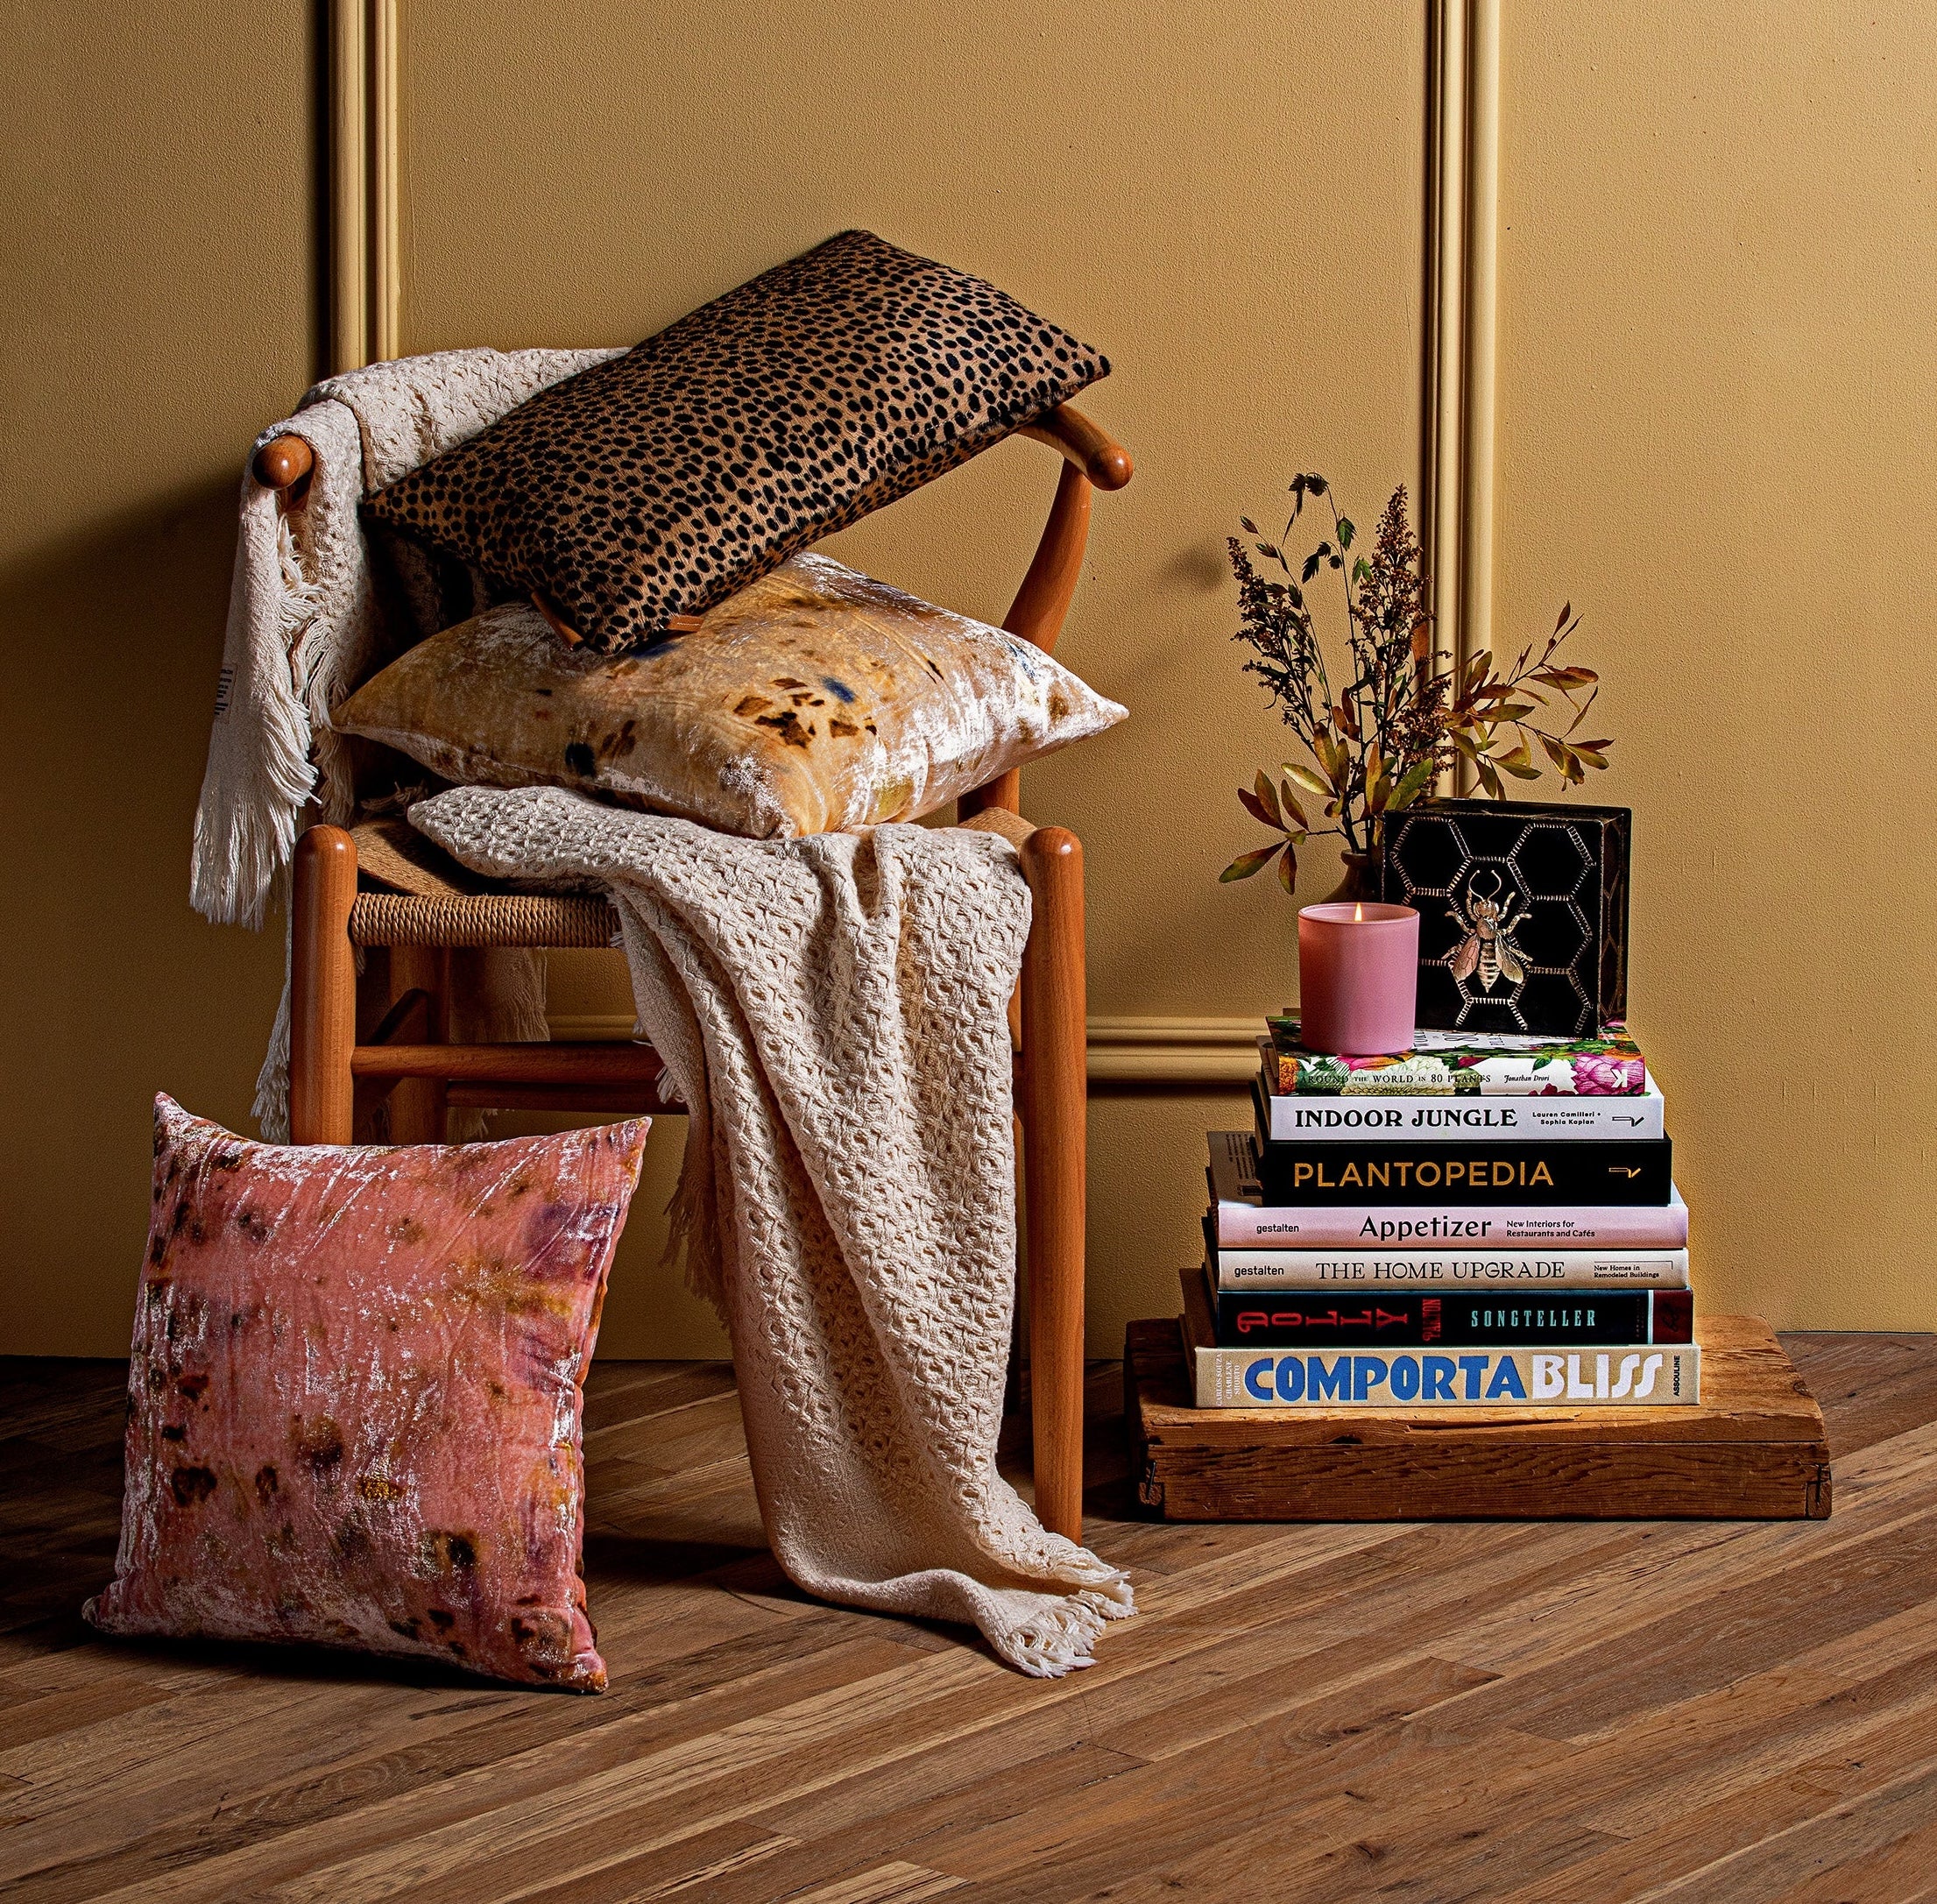 A cozy reading nook with a wooden chair adorned with a soft throw blanket and a leopard print cushion. A stack of books is placed next to the chair with a plant.